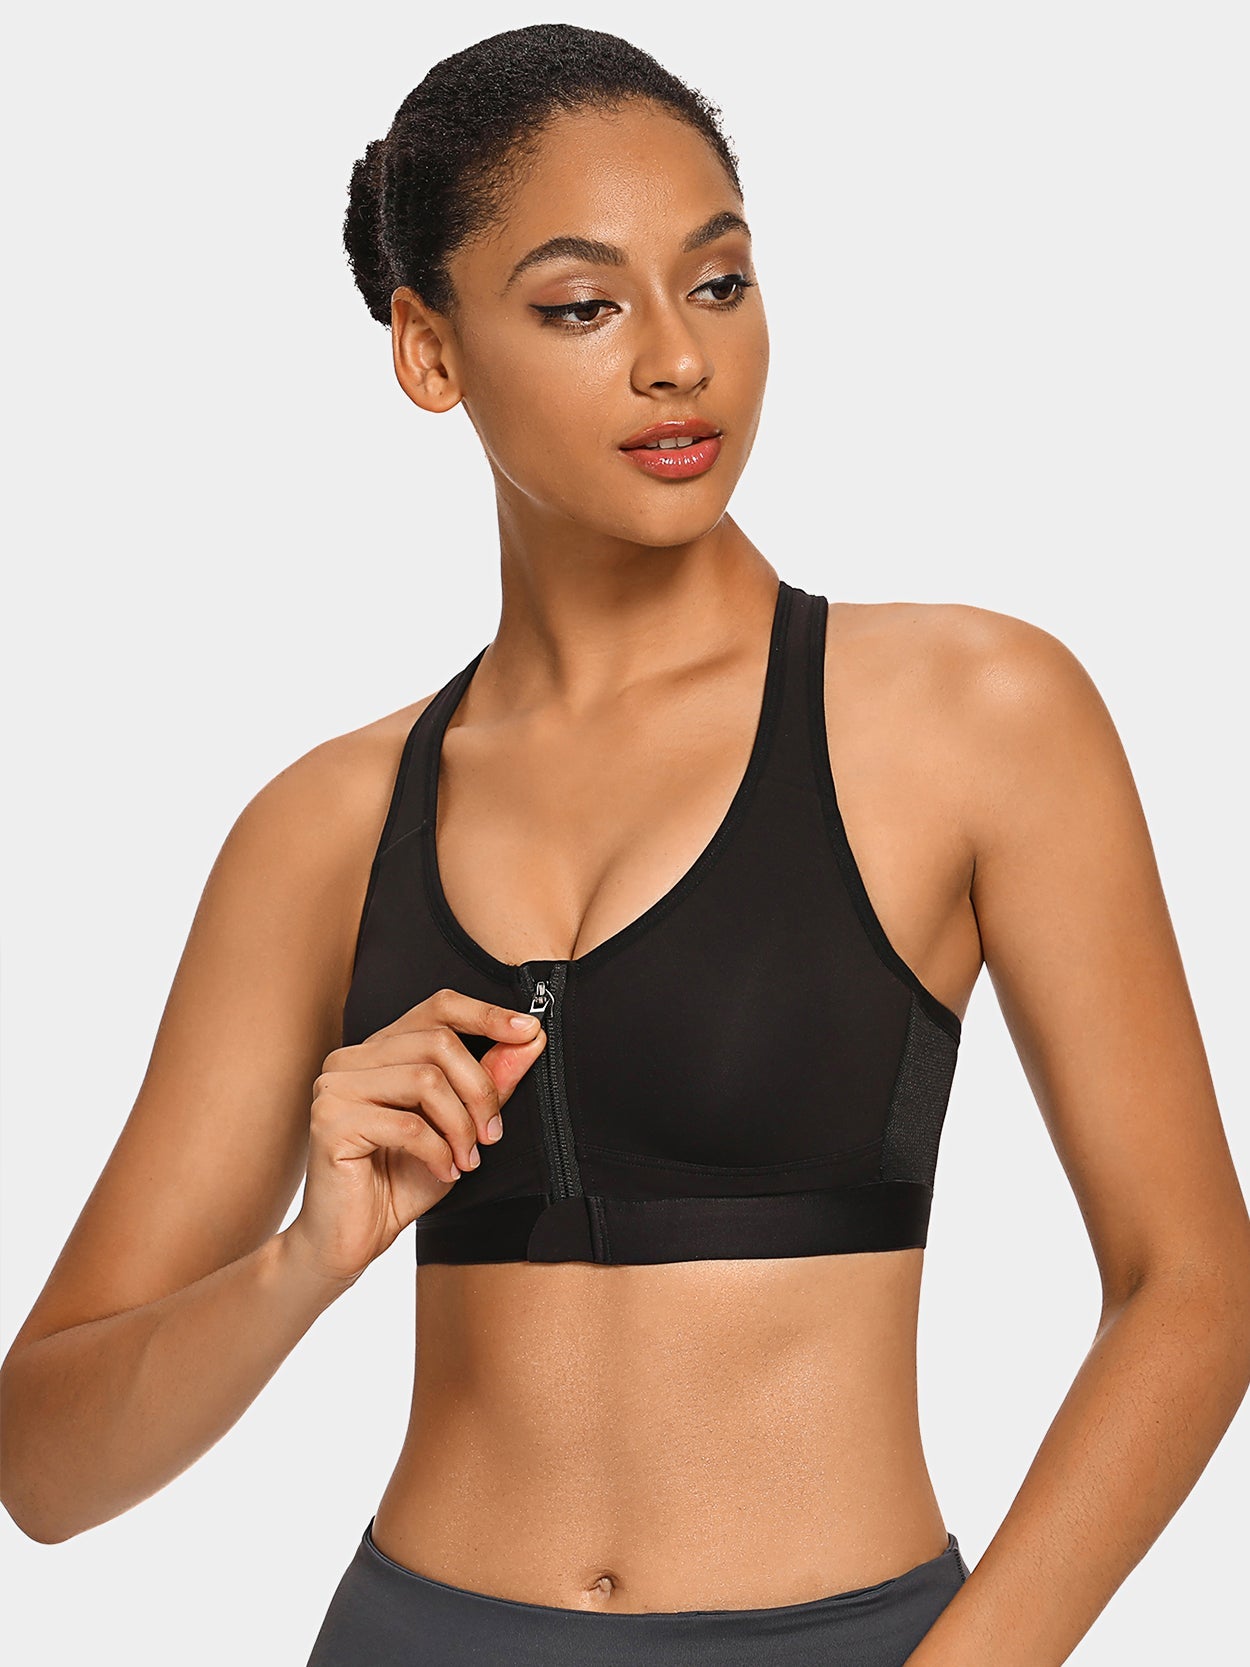 High Impact Sports Bra Non-removable Molded Cups Shift Zip Front Racerback  Padded Running Bra -  Australia